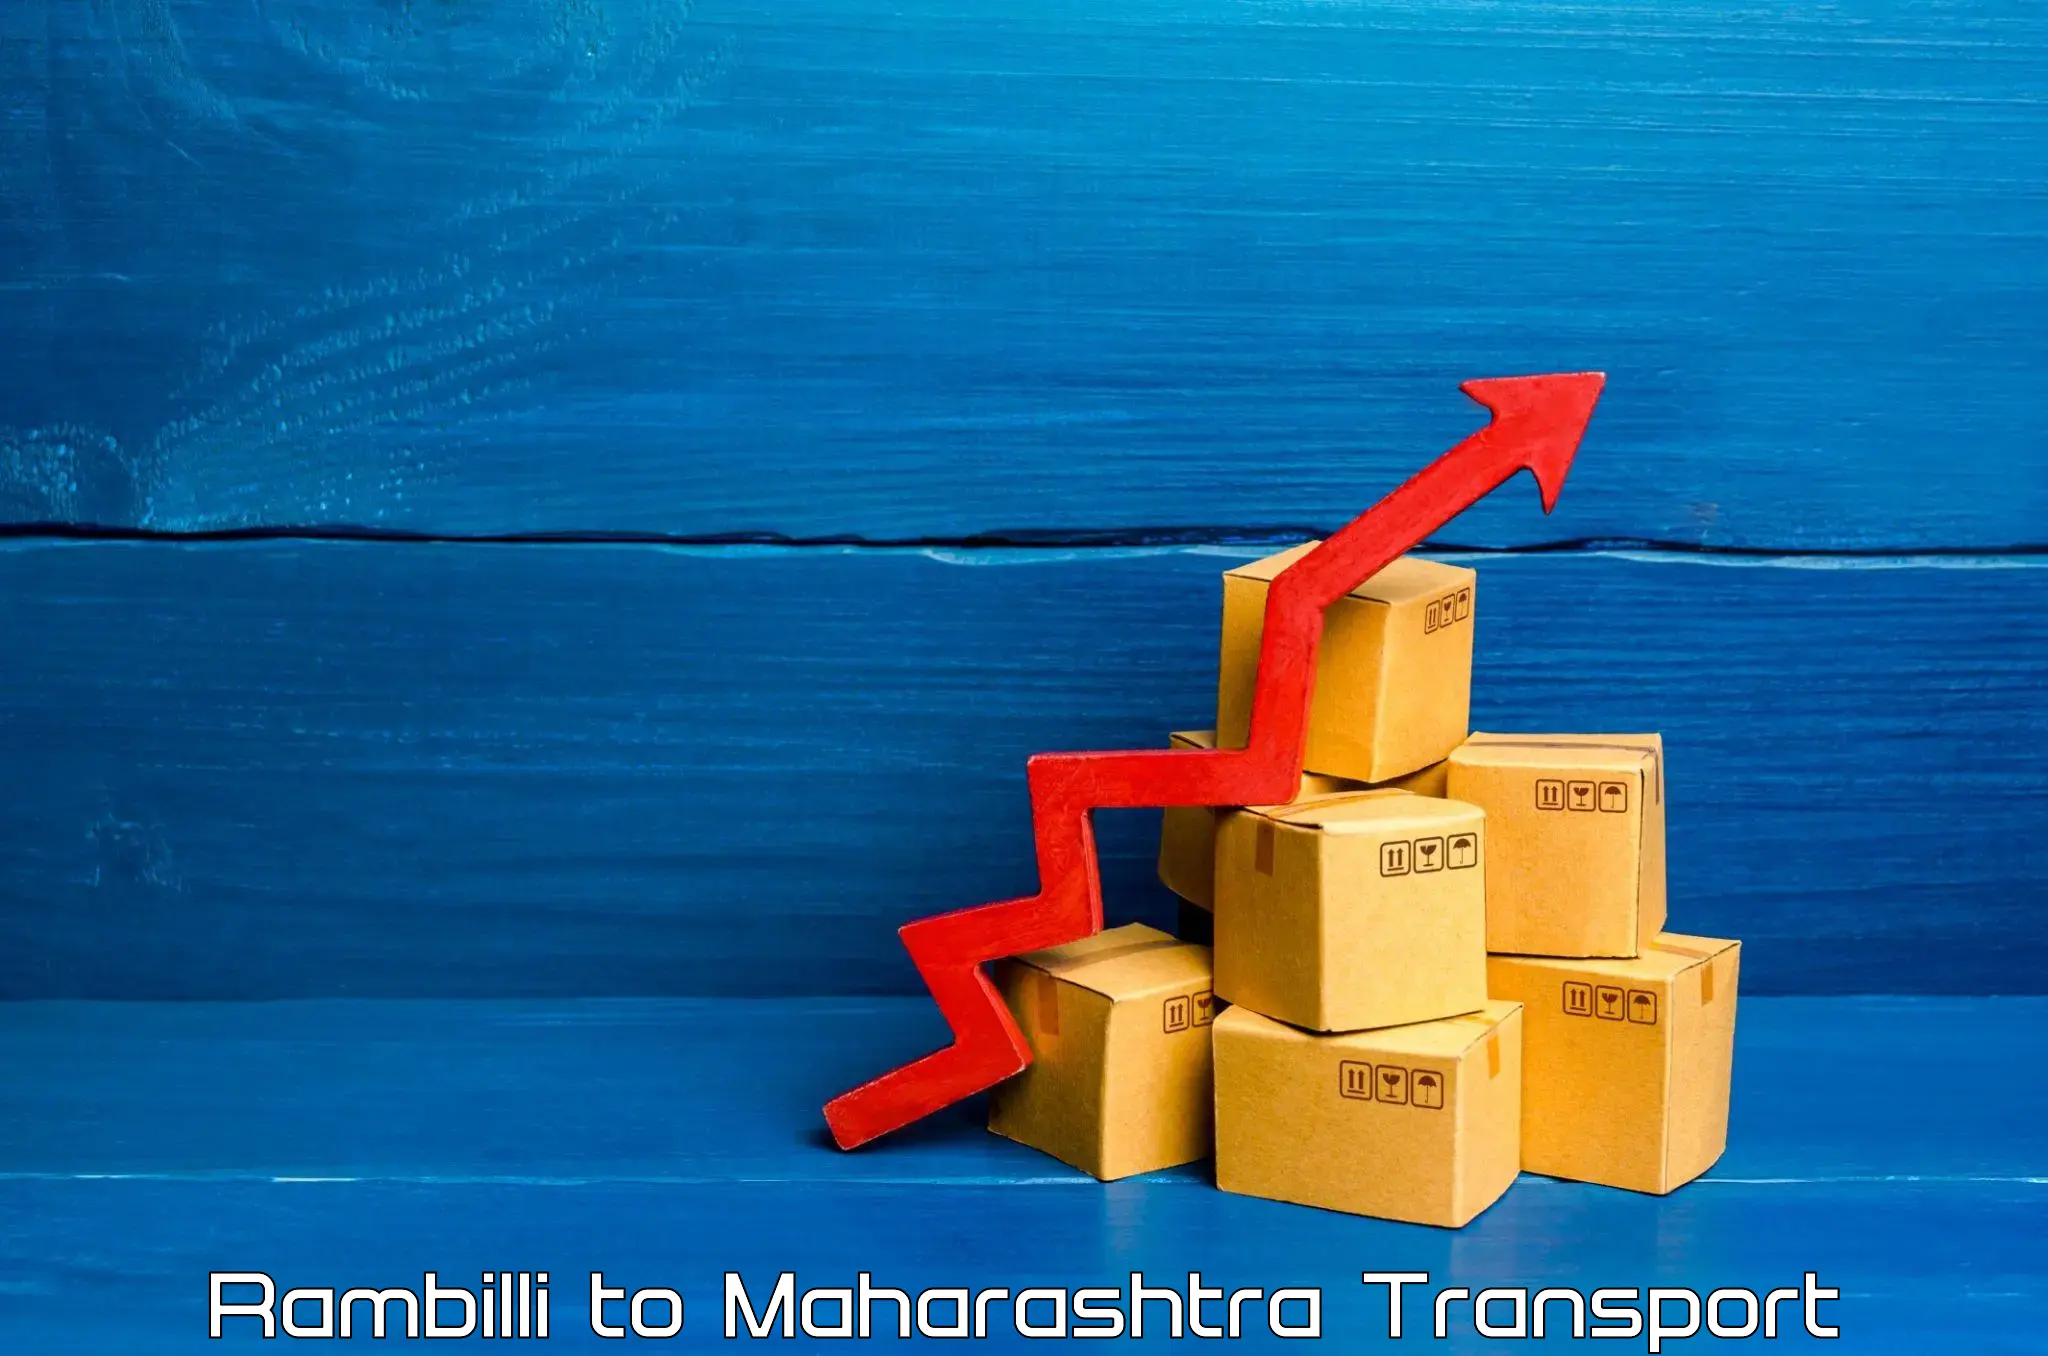 Truck transport companies in India Rambilli to Parbhani